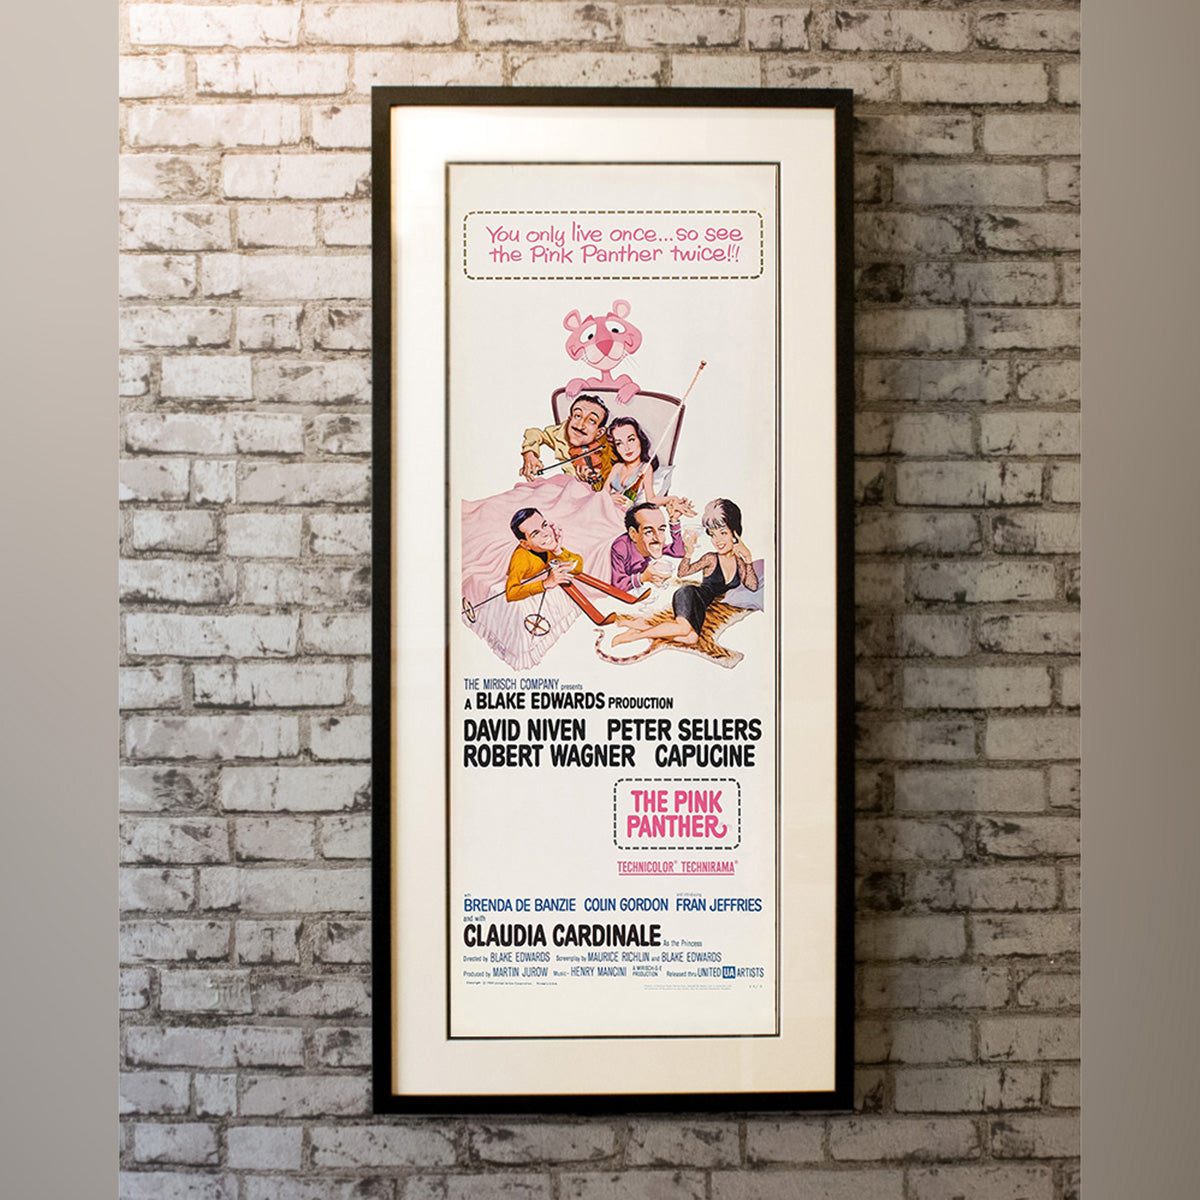 Original Movie Poster of Pink Panther, The (1964)